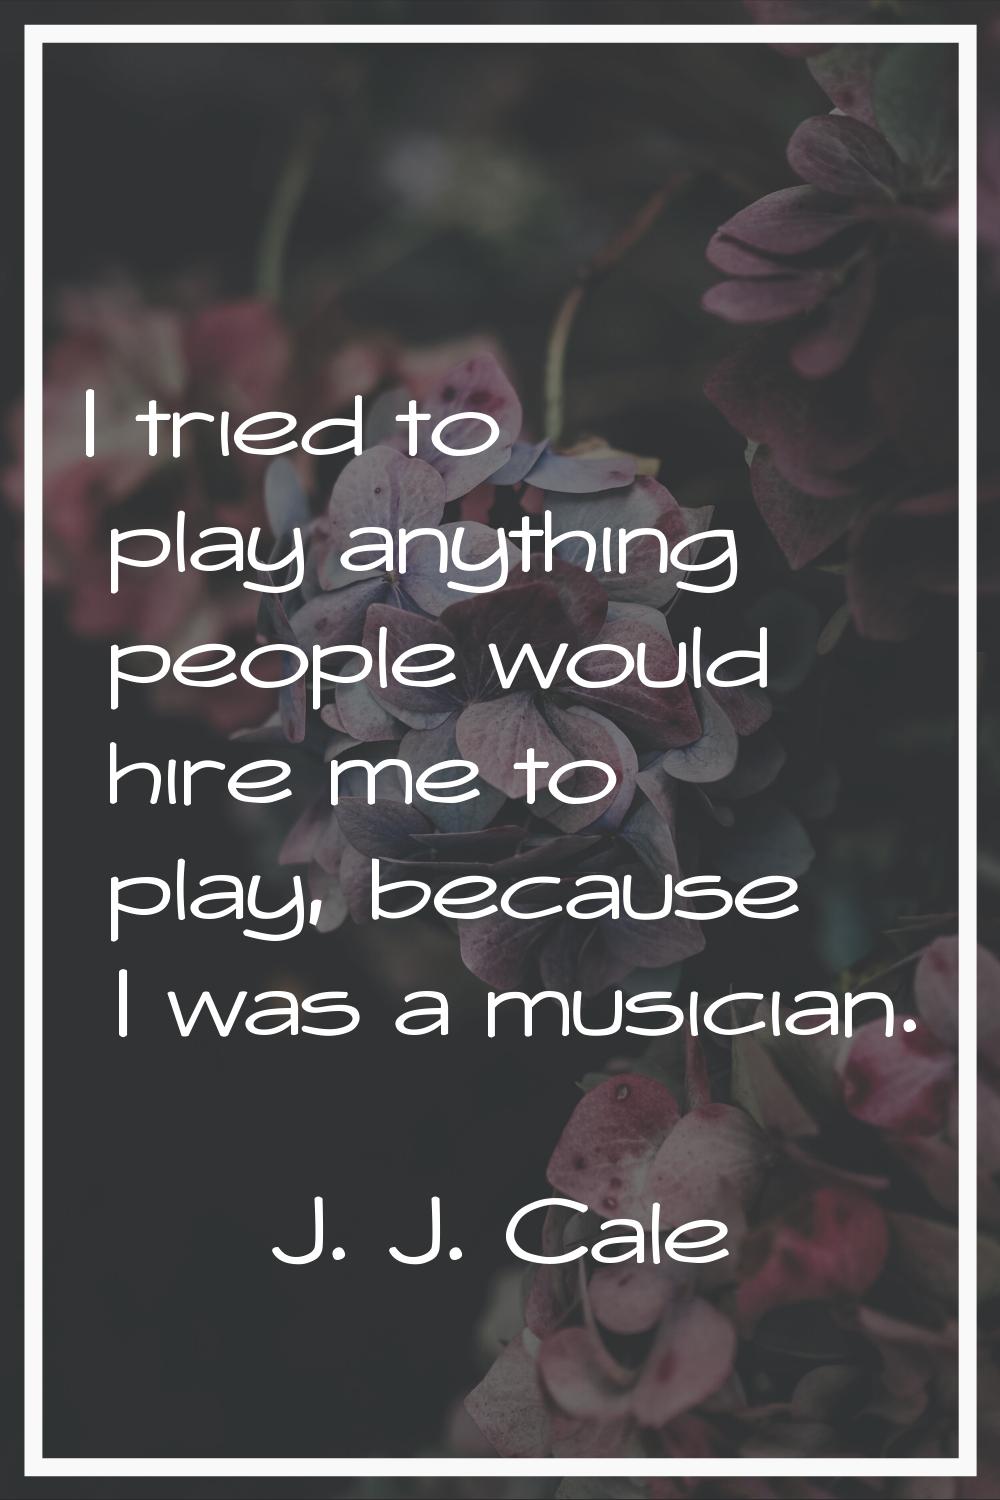 I tried to play anything people would hire me to play, because I was a musician.